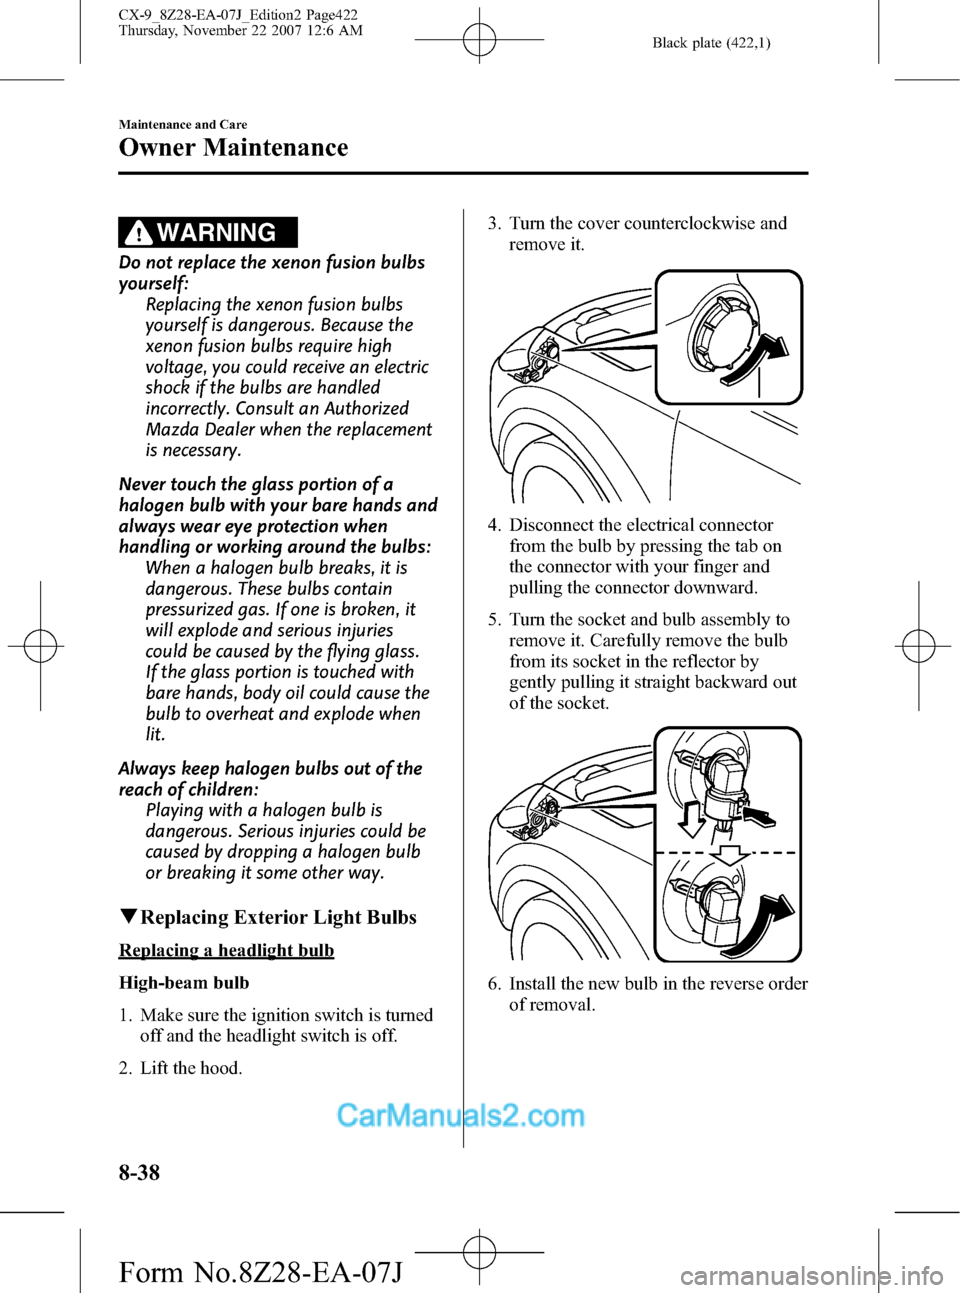 MAZDA MODEL CX-9 2008  Owners Manual (in English) Black plate (422,1)
WARNING
Do not replace the xenon fusion bulbs
yourself:
Replacing the xenon fusion bulbs
yourself is dangerous. Because the
xenon fusion bulbs require high
voltage, you could recei